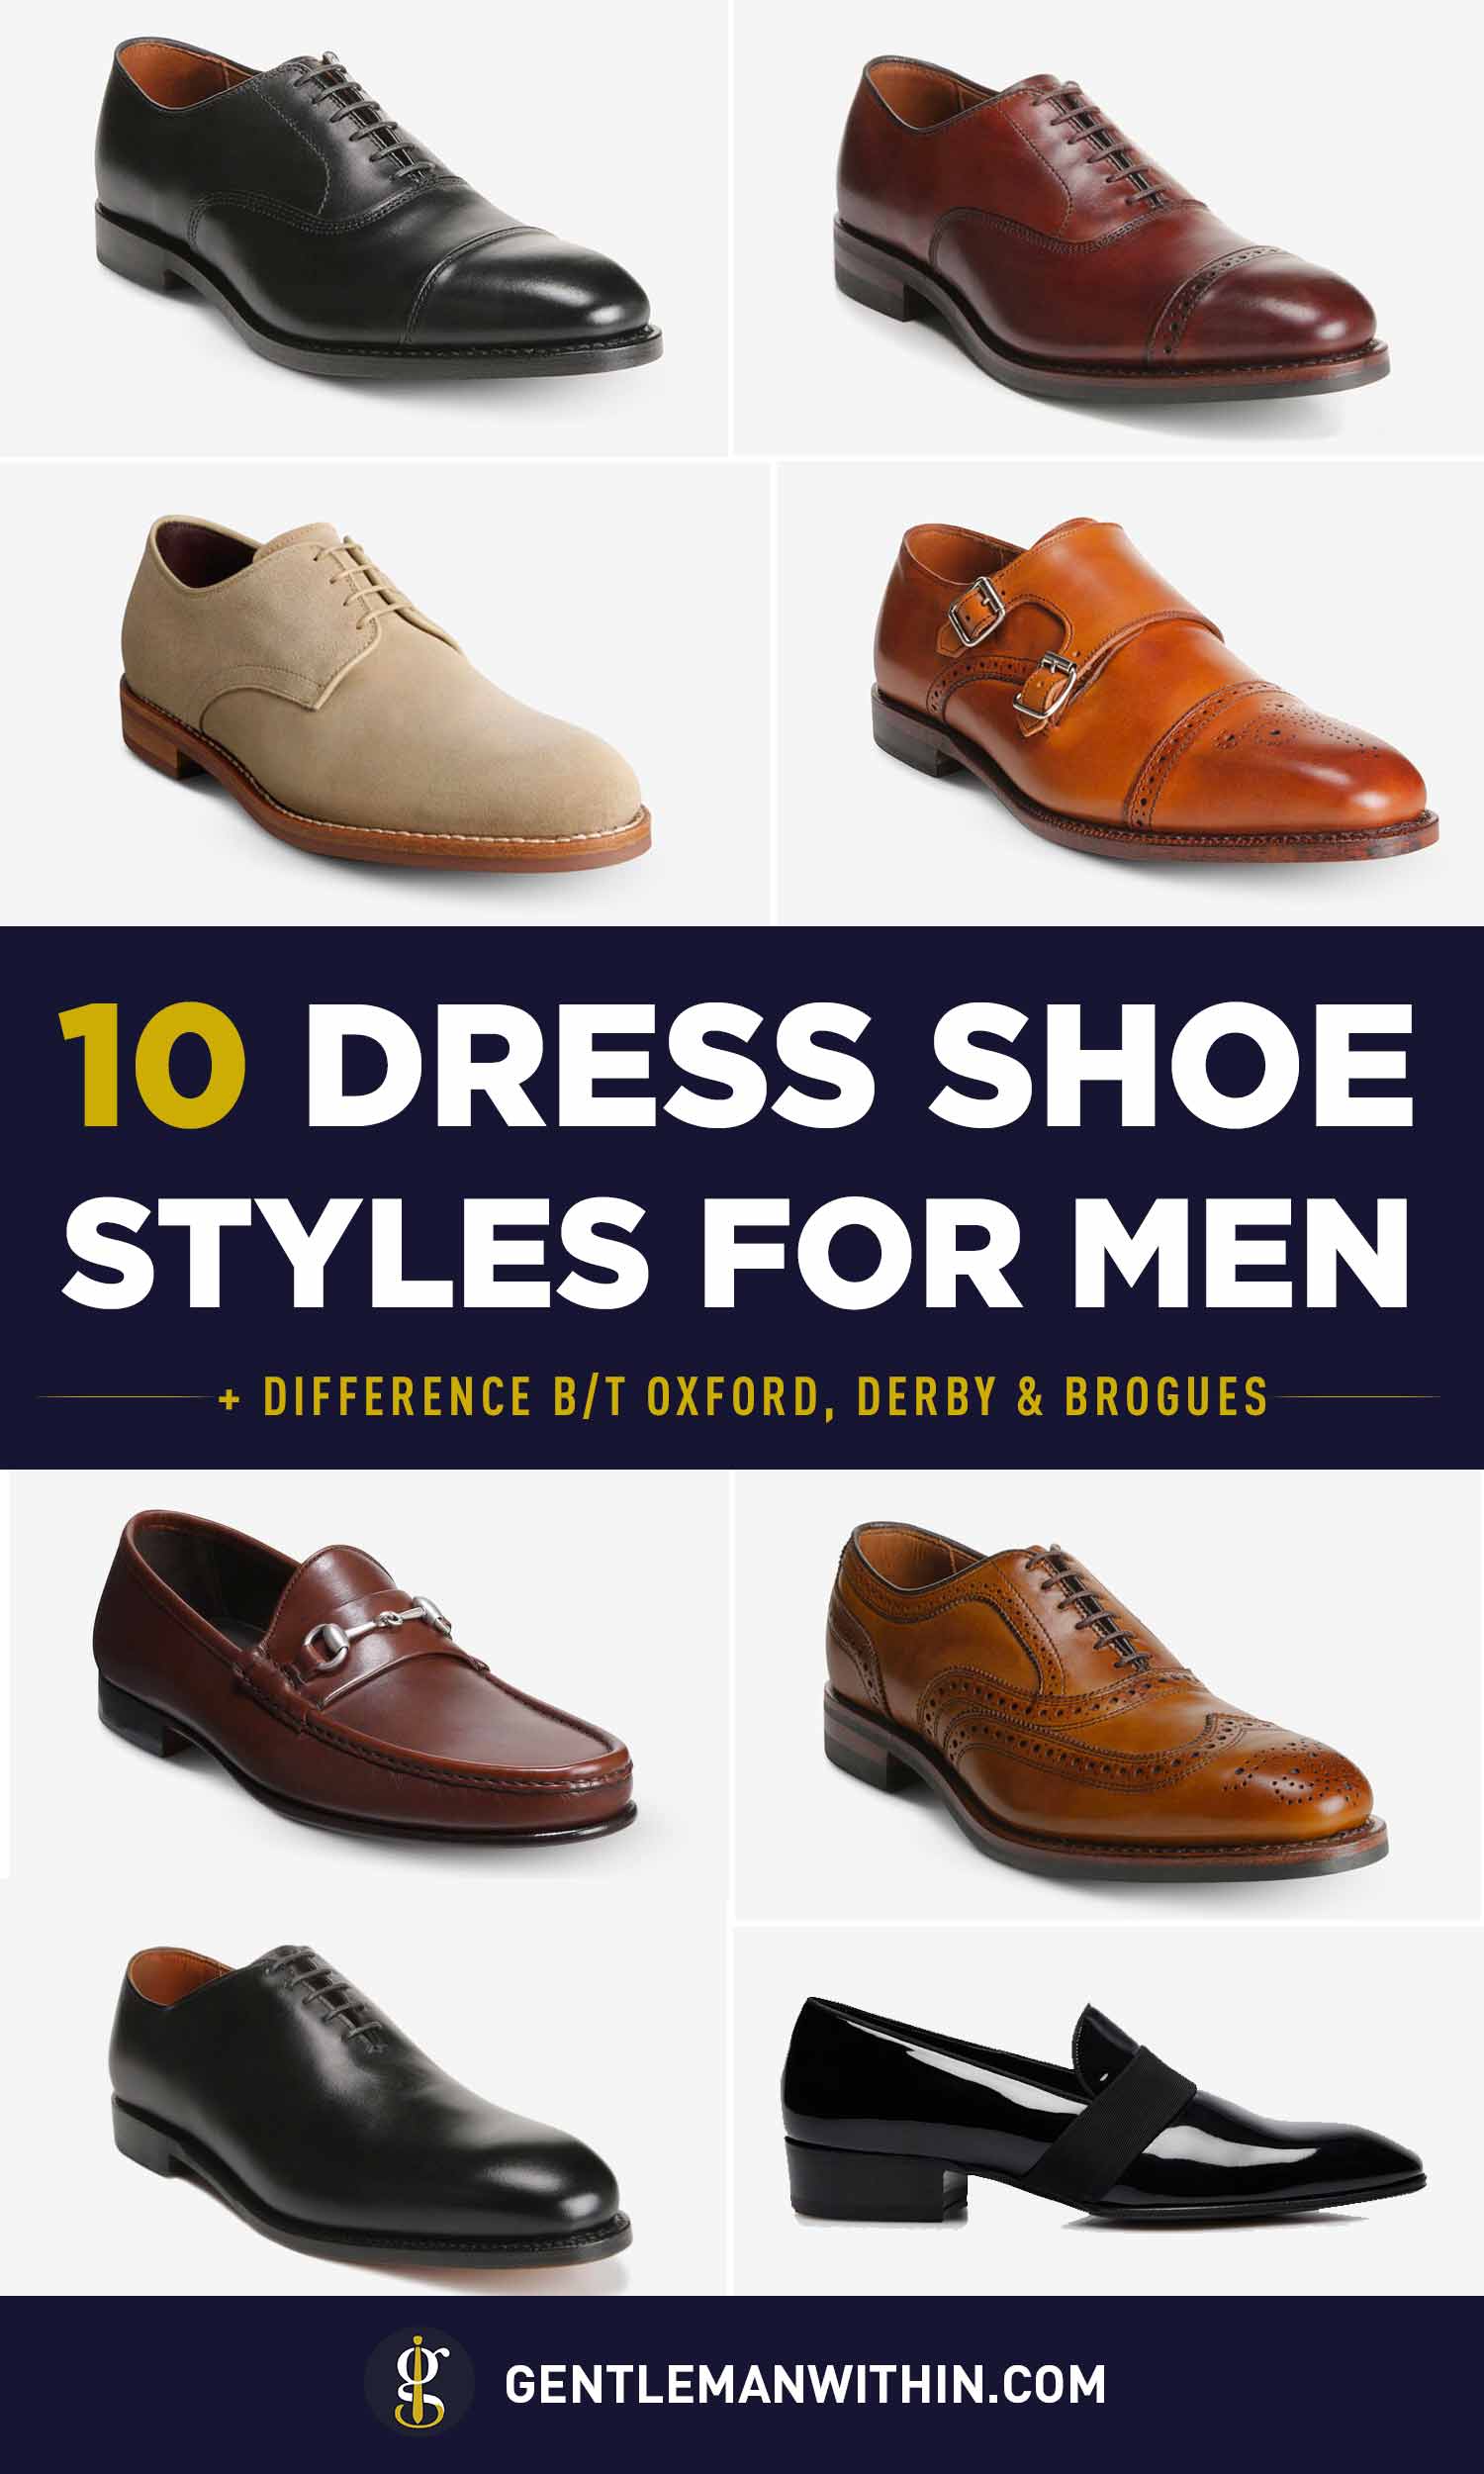 The Definitive Oxford Shoes Guide For Men | FashionBeans